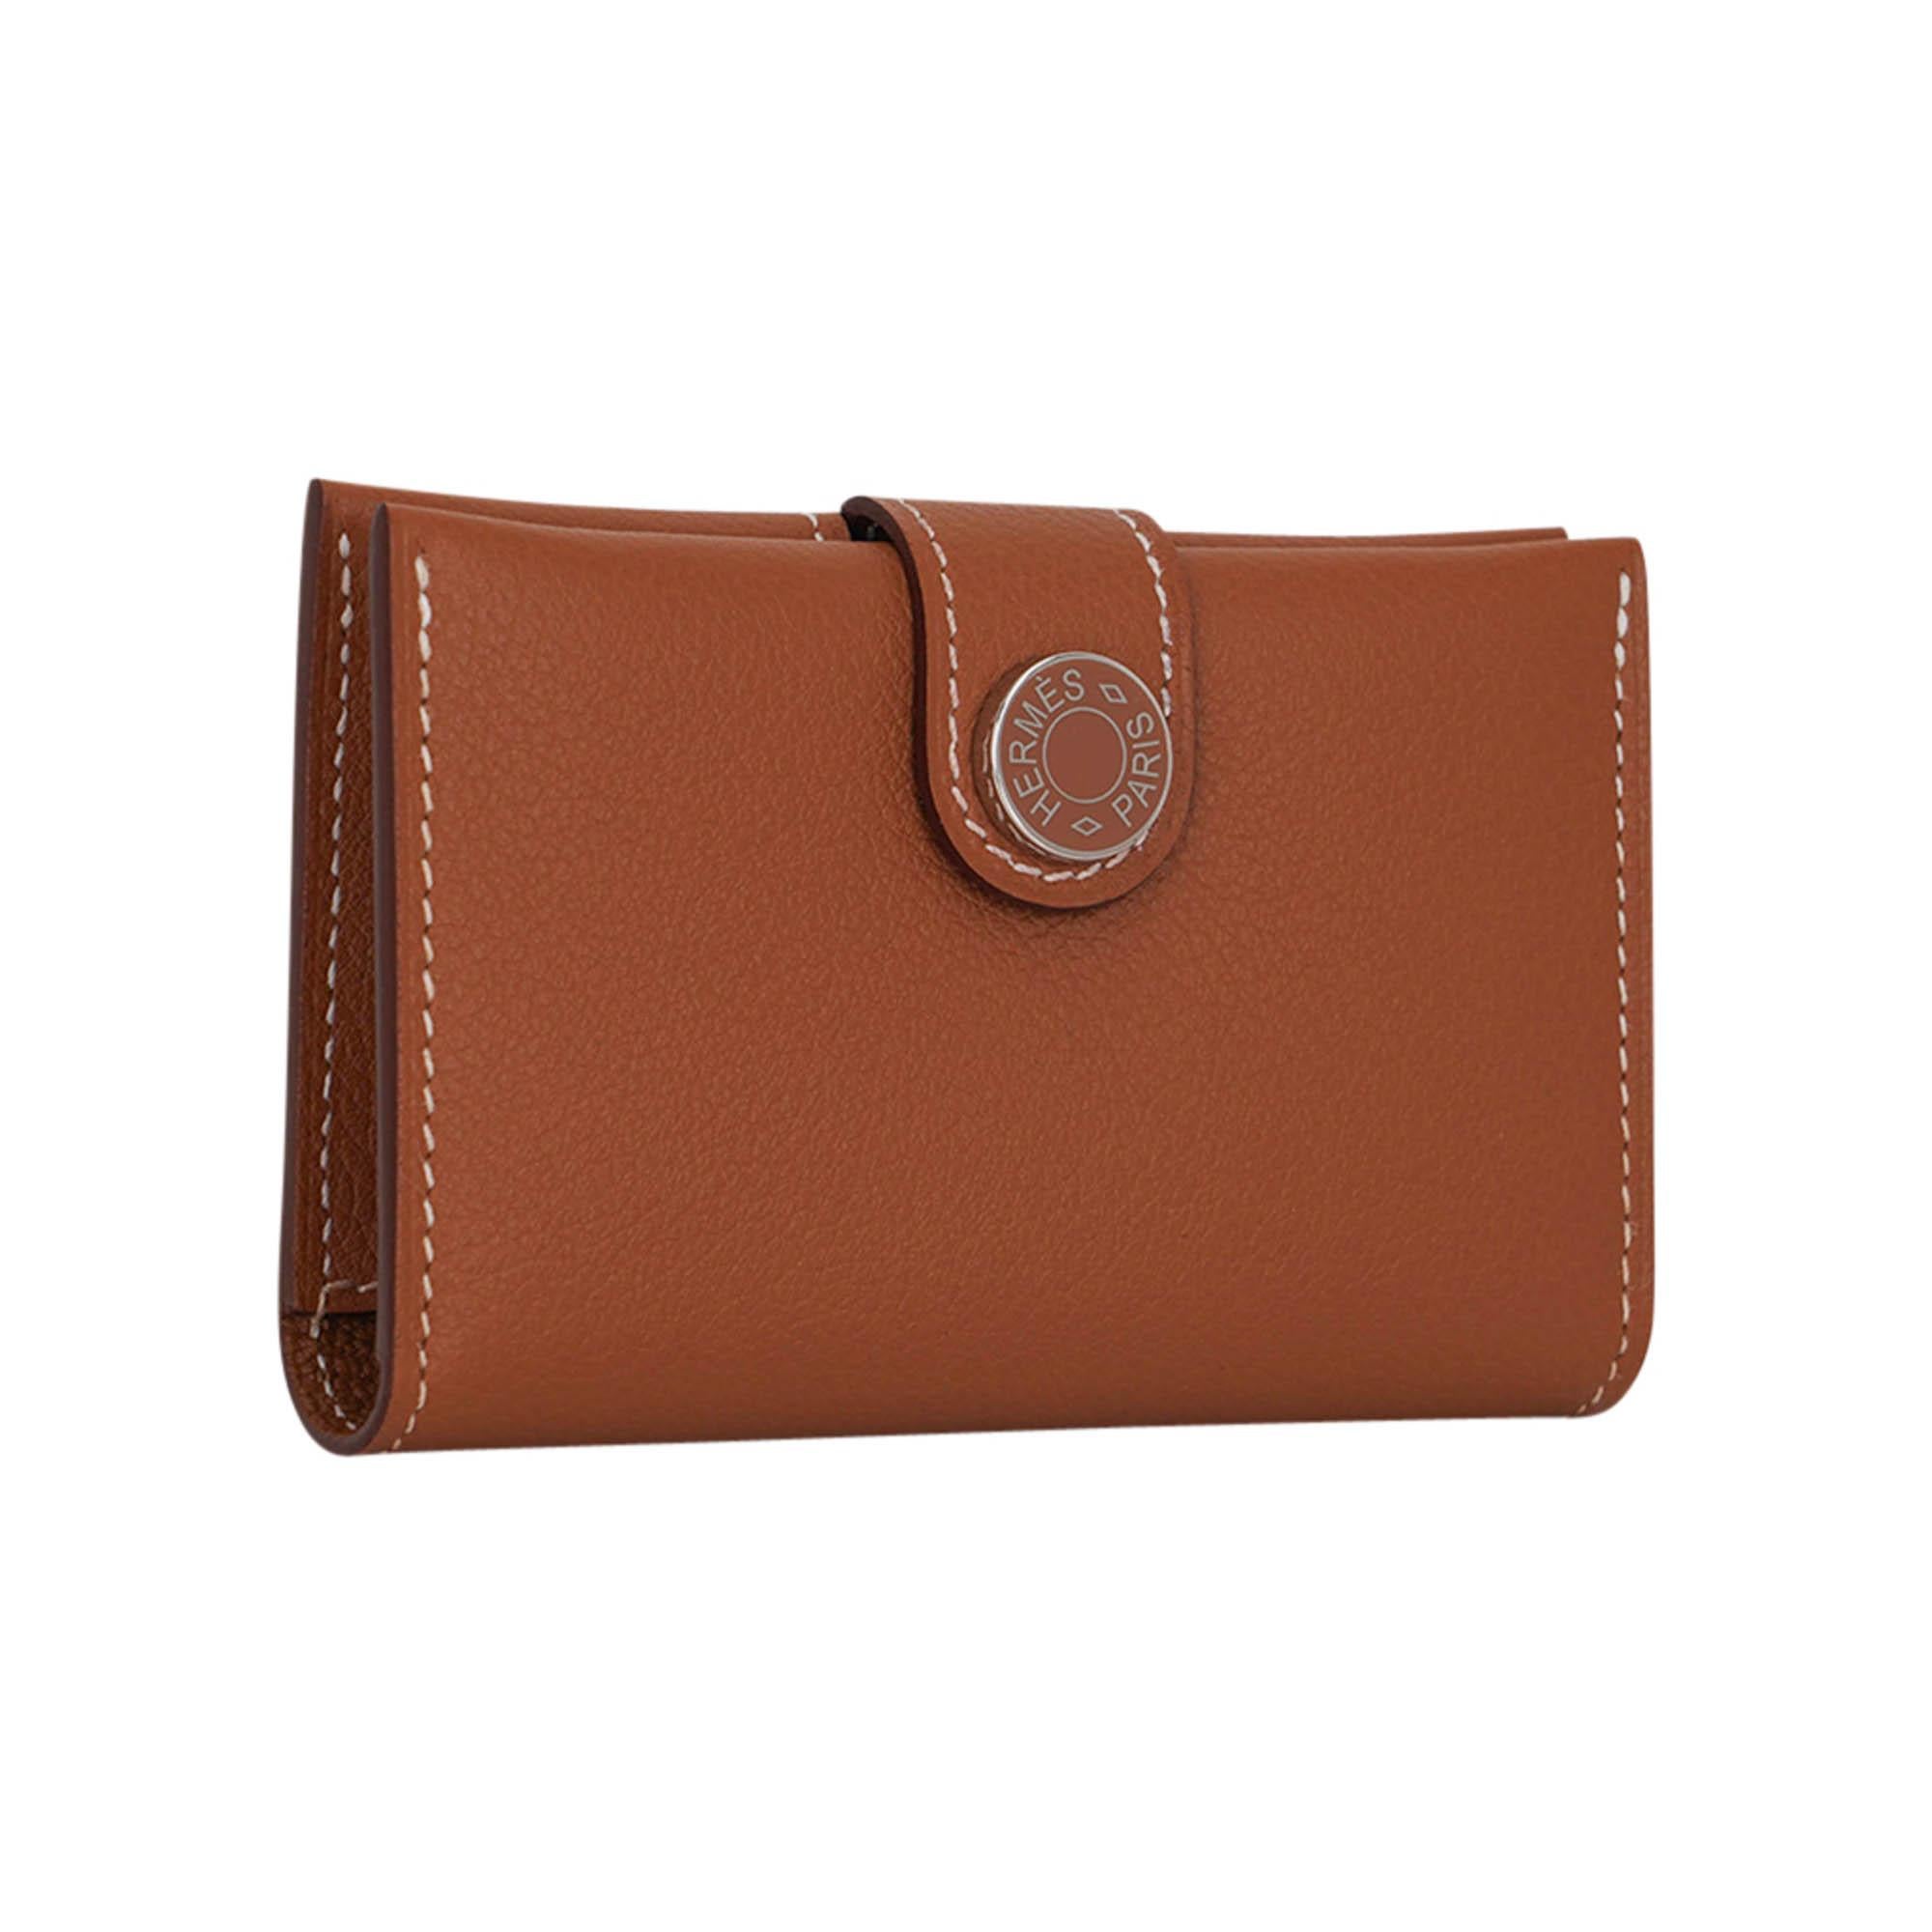 Mightychic offers an Hermes R.M.S. Card Holder featured in Gold.
In beautiful Evercolor calfskin leather - a small, satiny grain with suppleness.
Snap closure with lacquered palladium plated Clou de Selle.
Comes with signature Hermes box.
New or